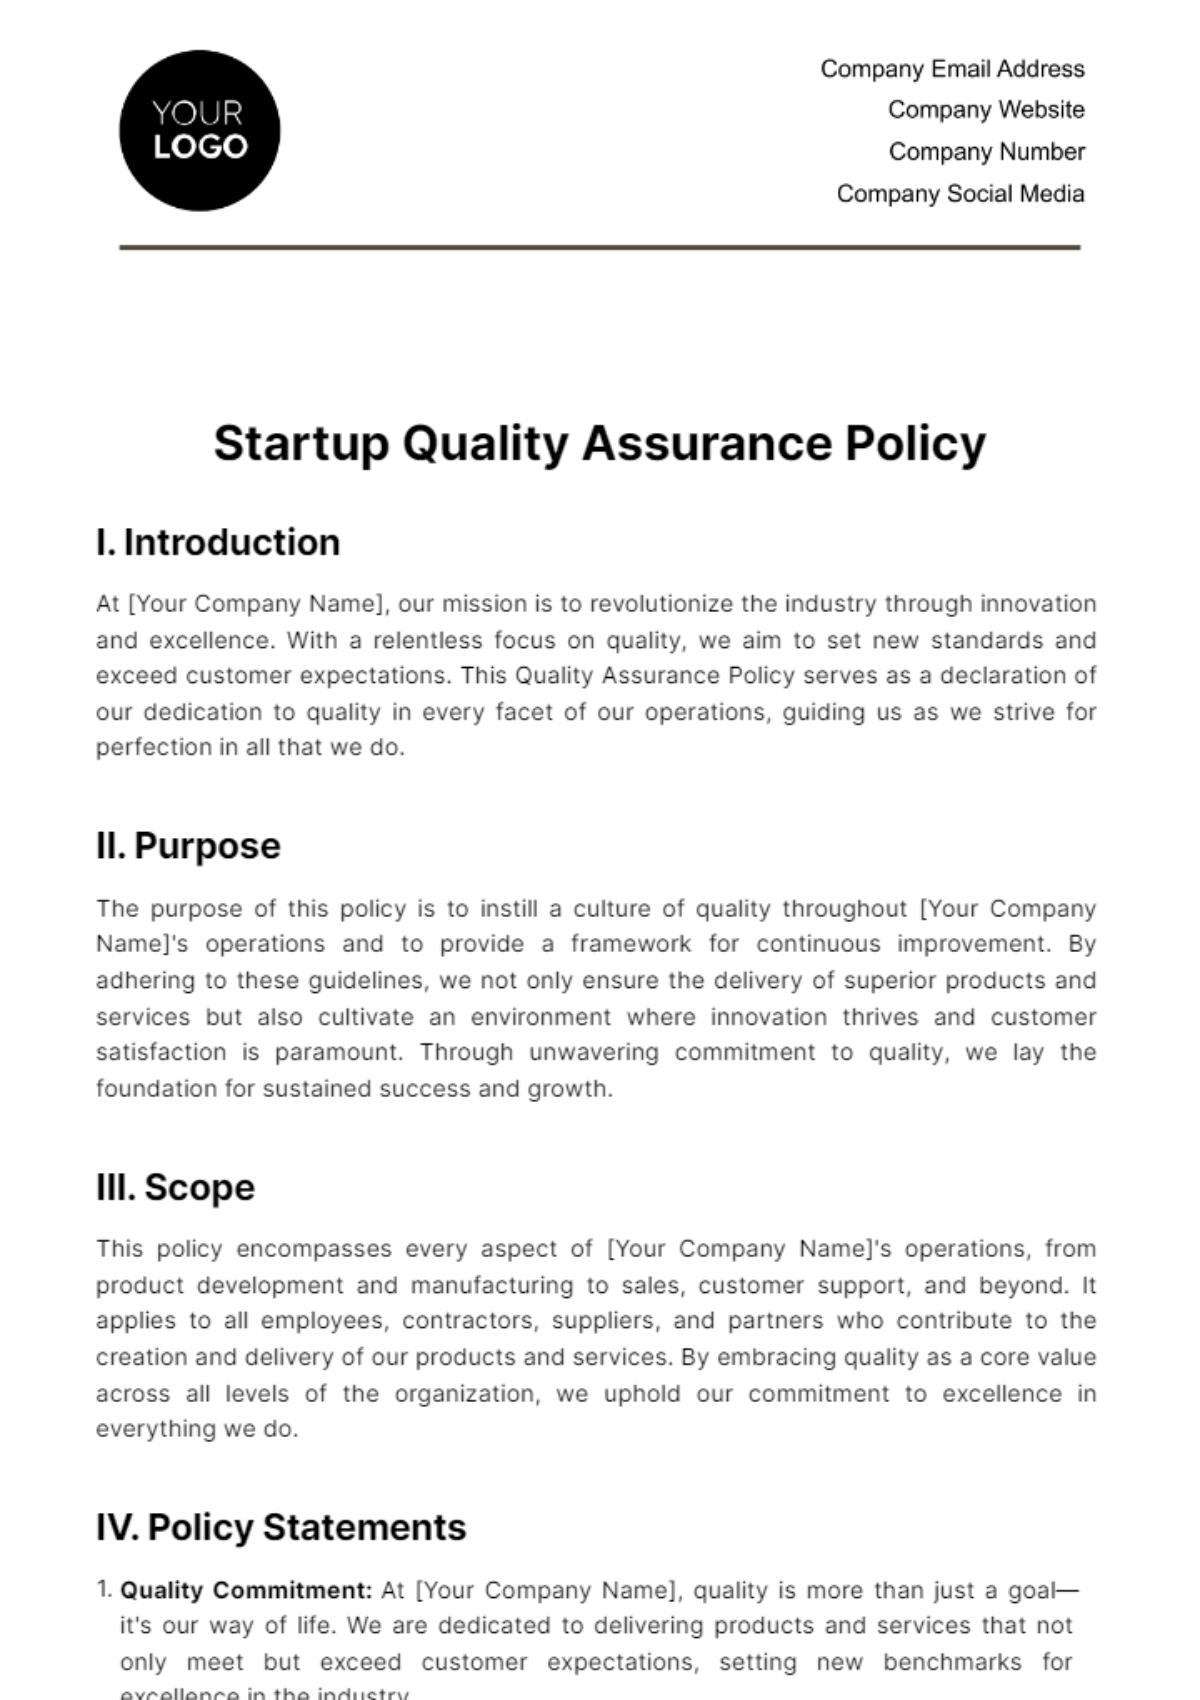 Startup Quality Assurance Policy Template